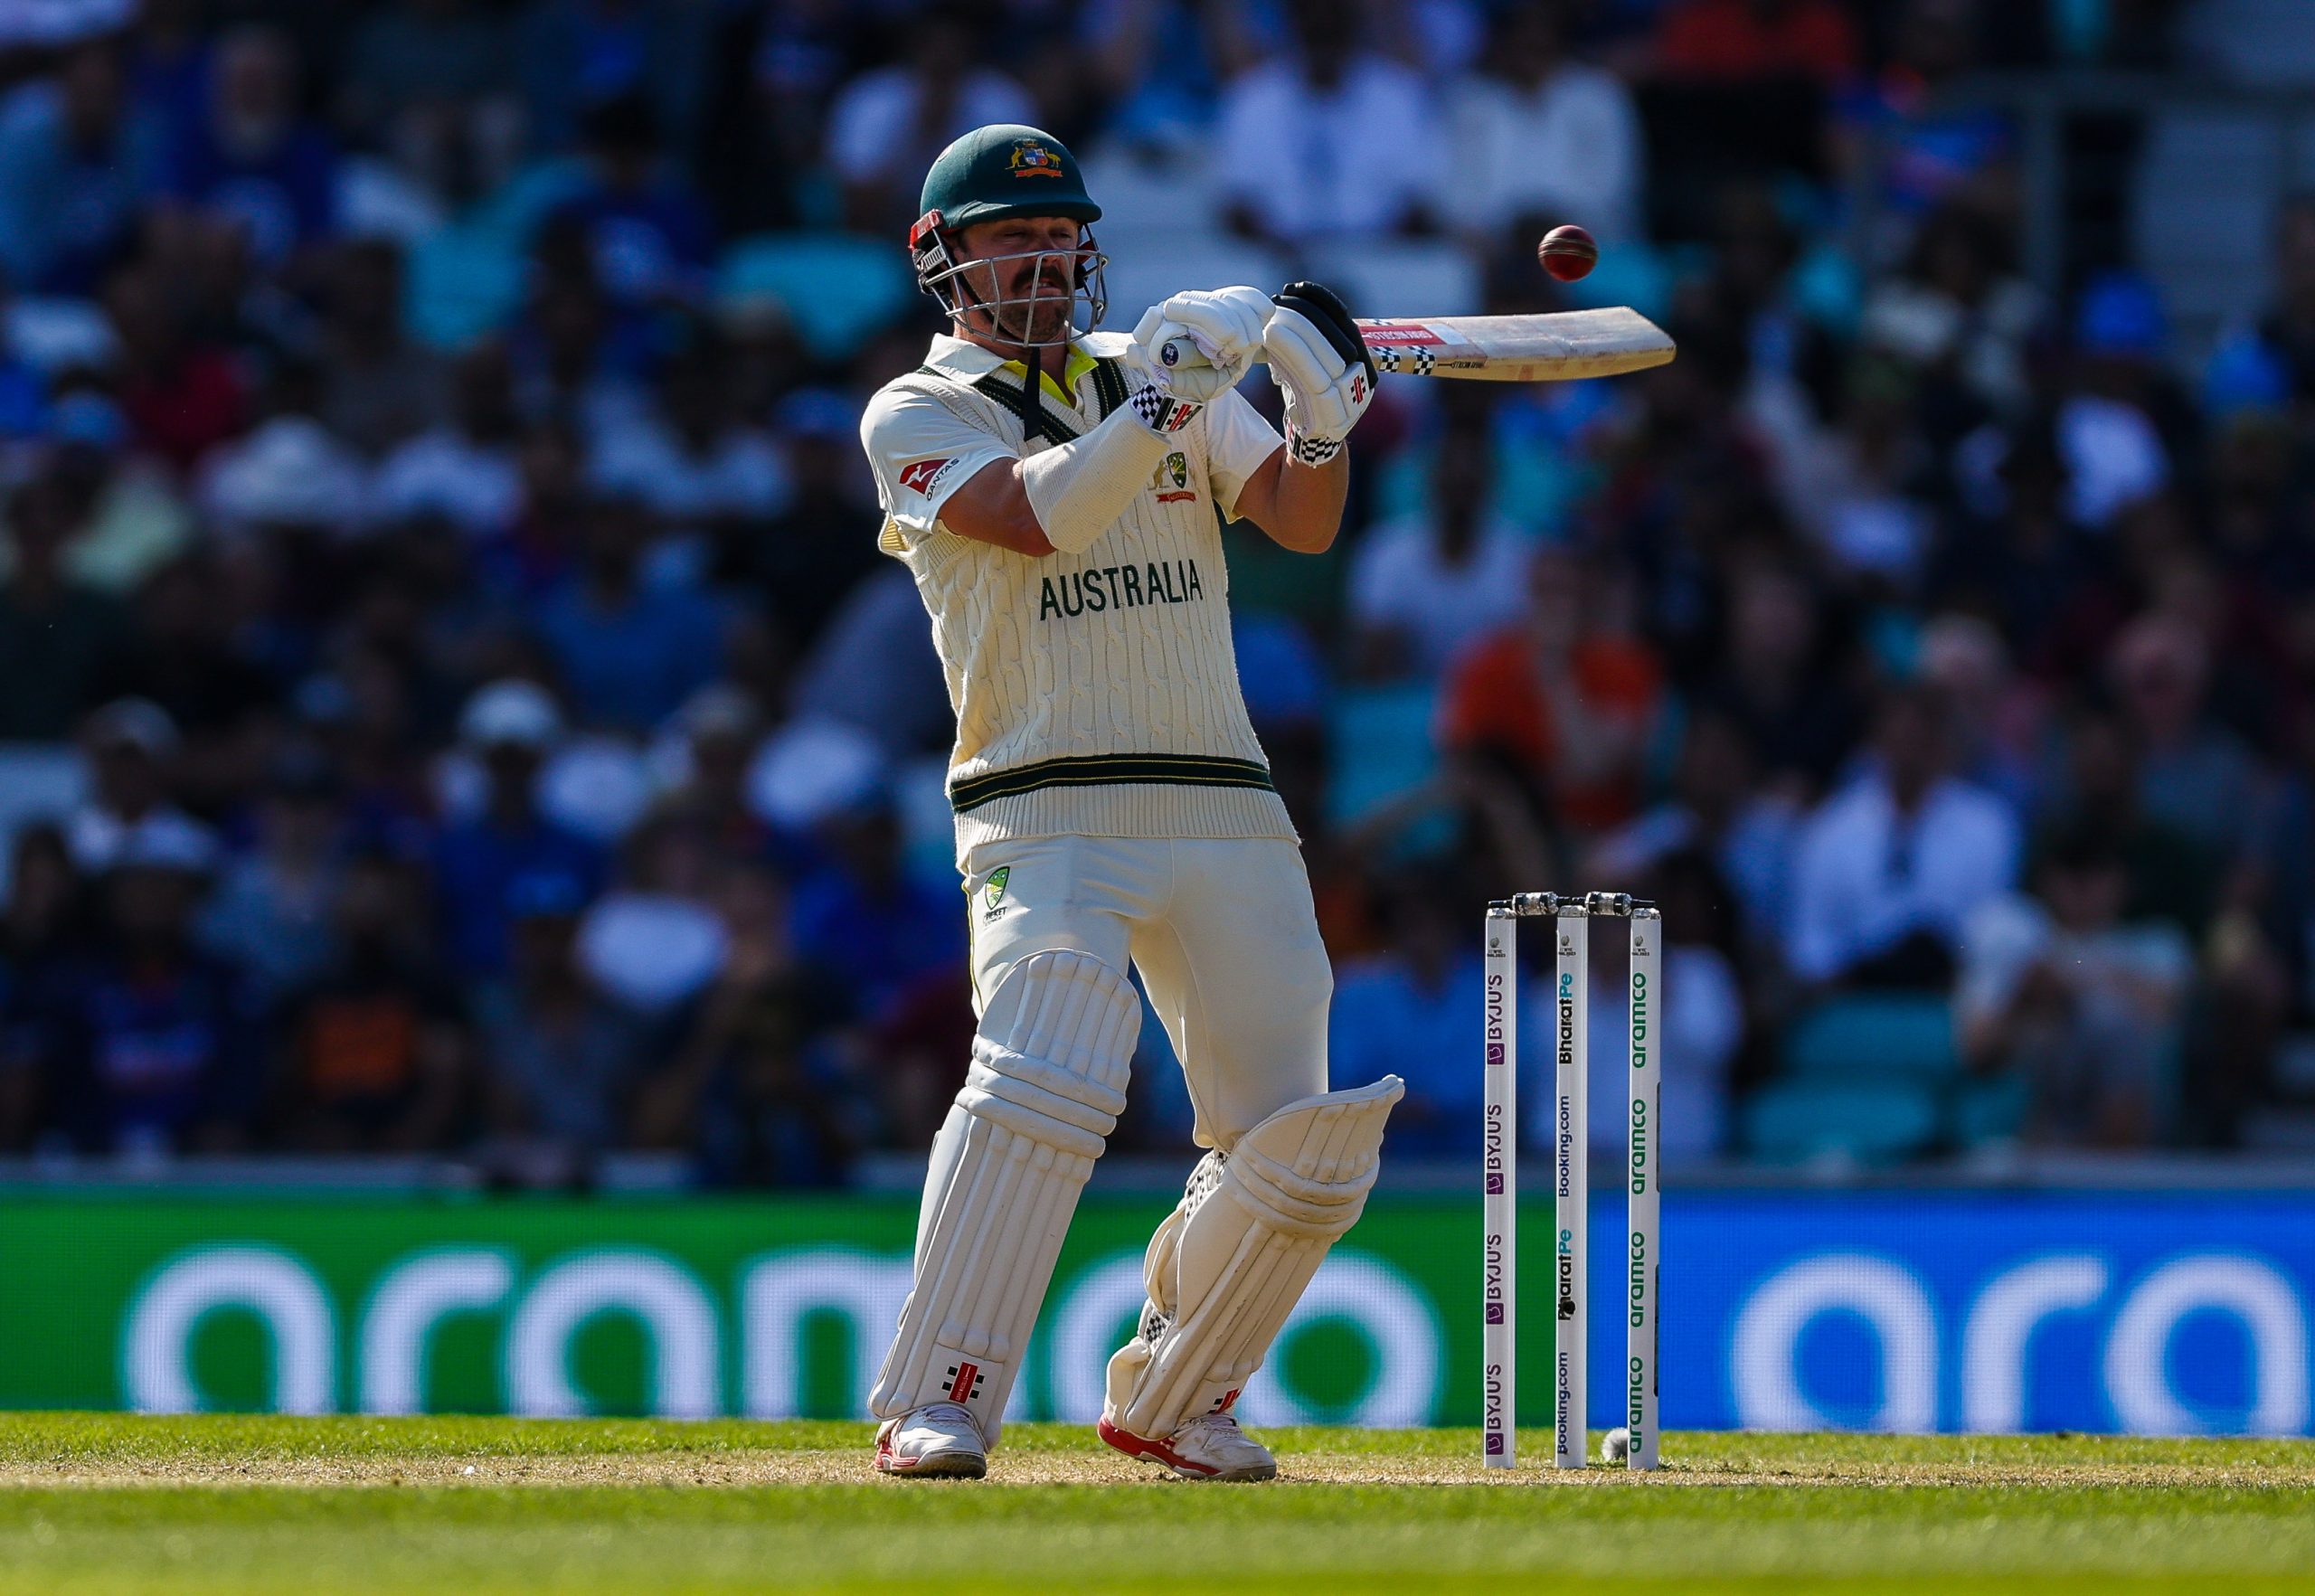 Travball, indomitable Lyon and all out attack – key stats ahead of Ashes